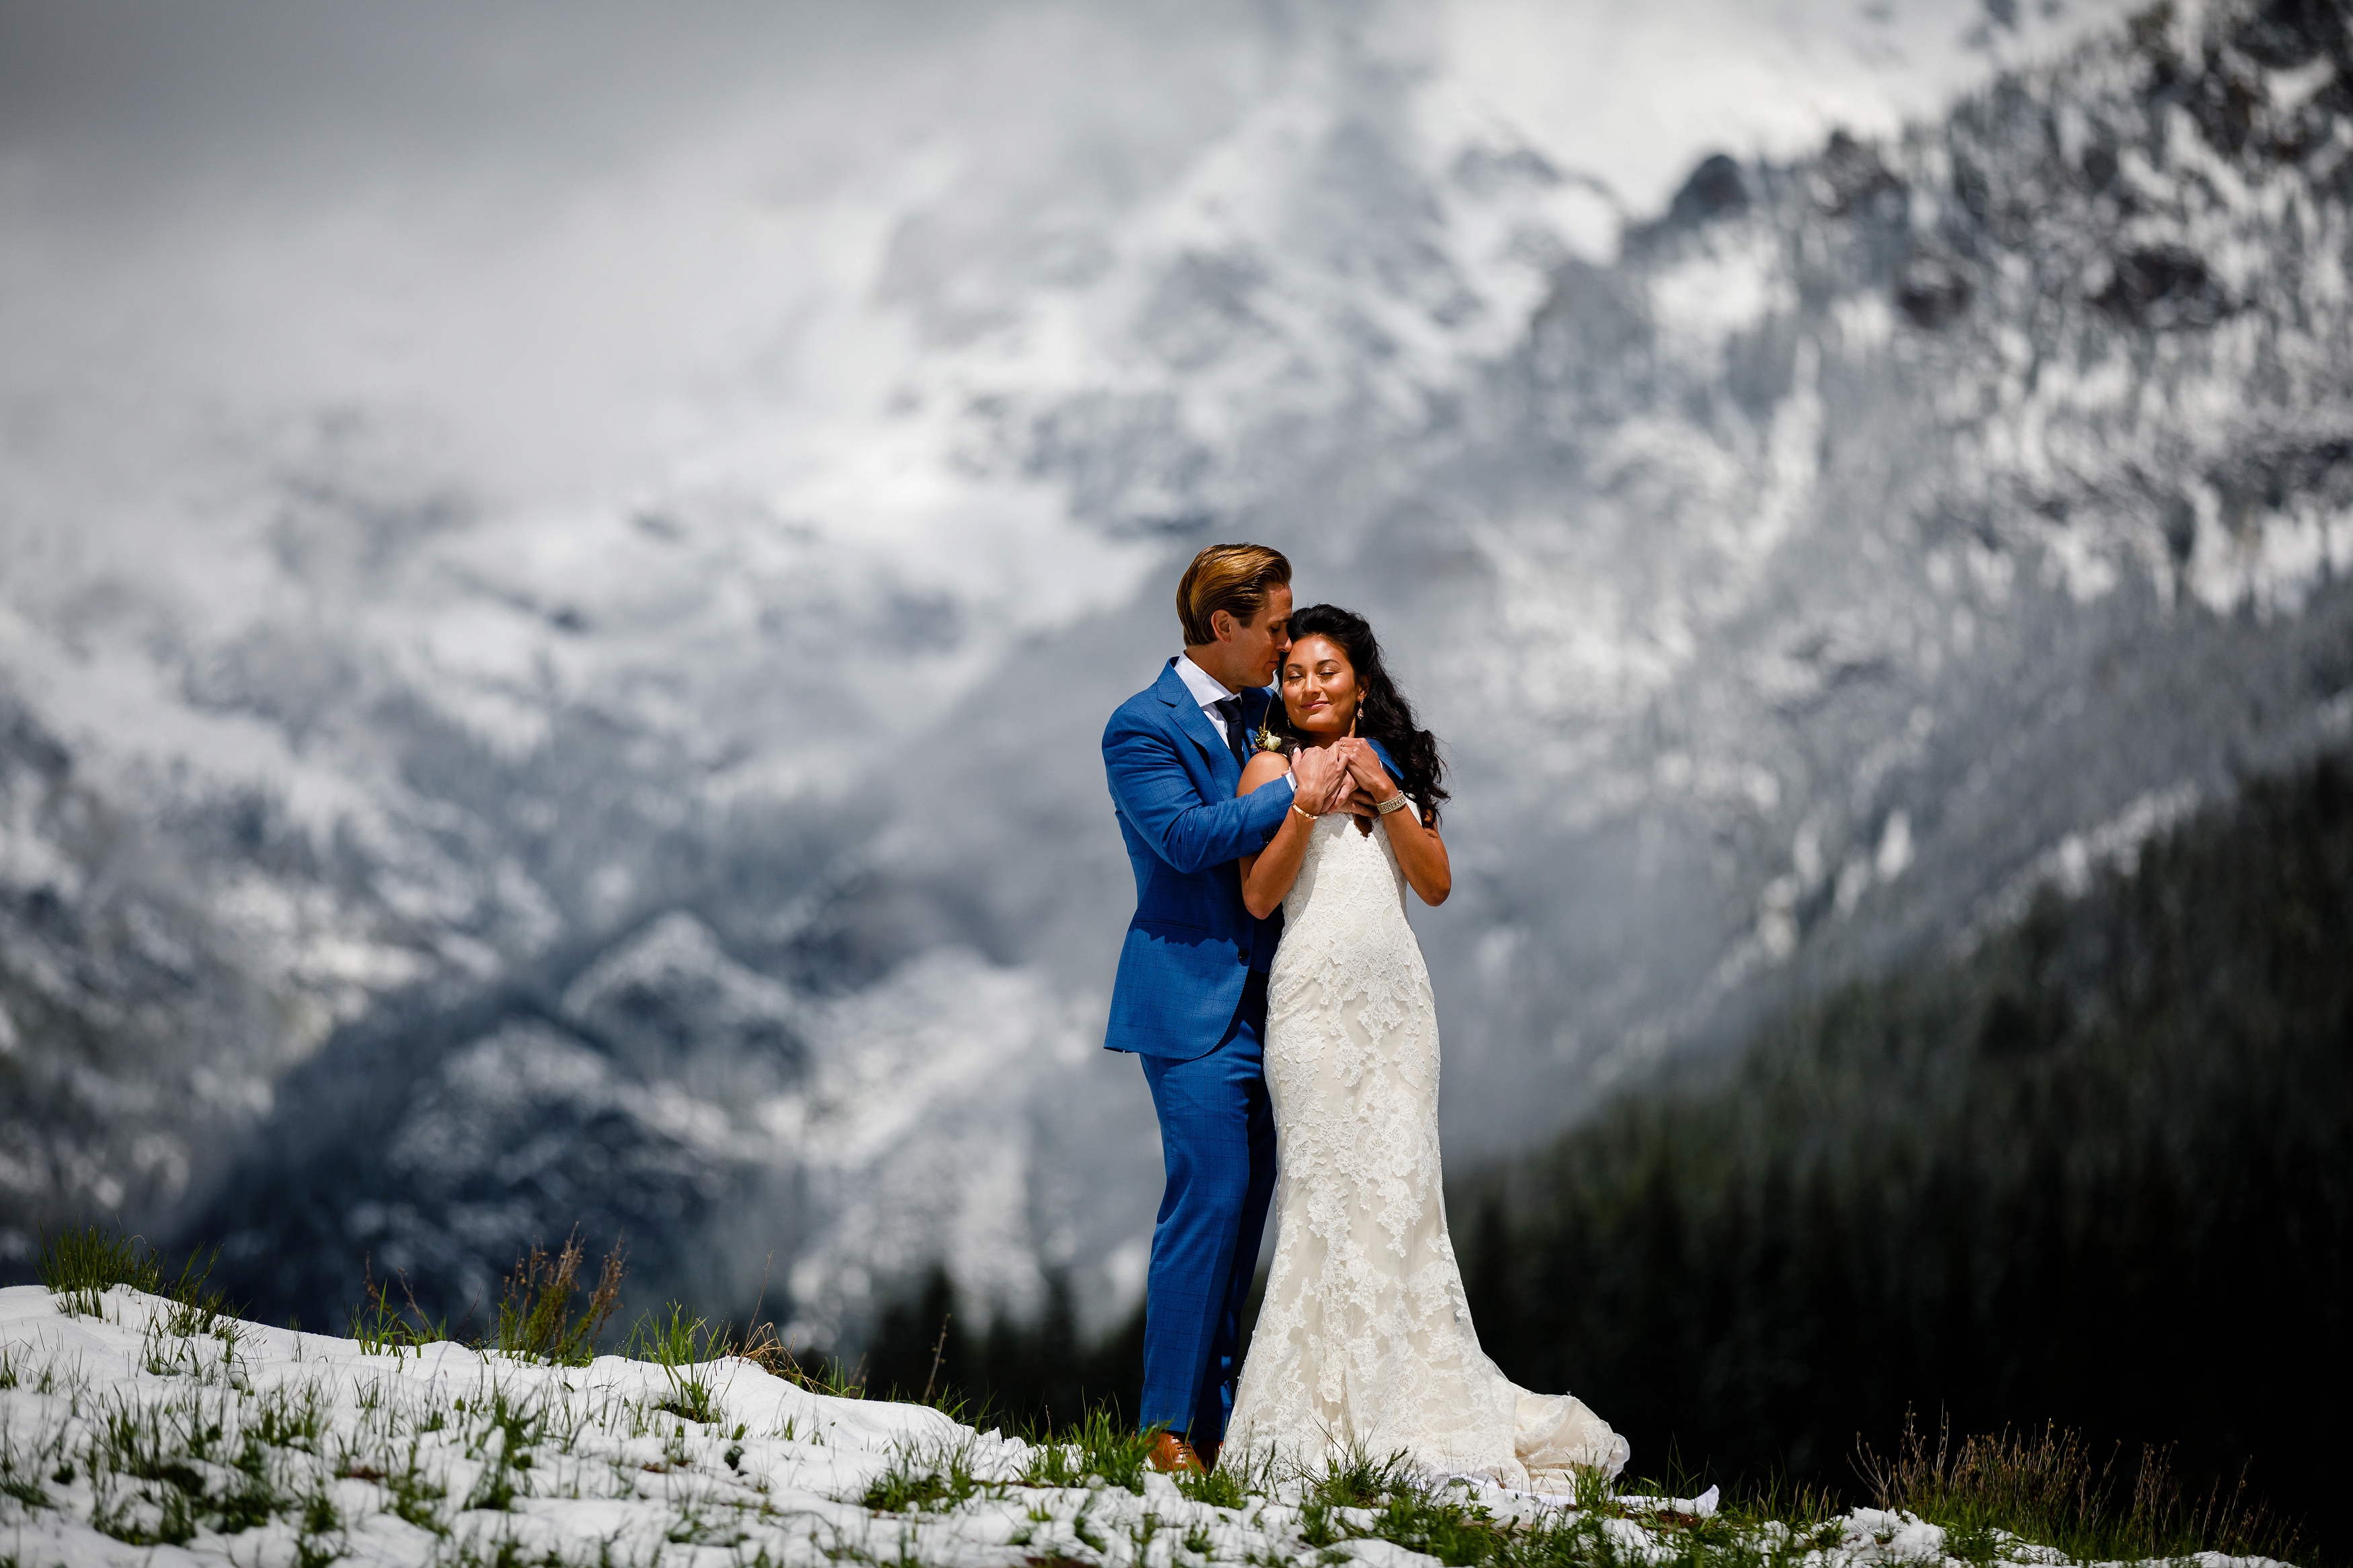 These two did not expect a Winter Wedding in June at Piney River Ranch.